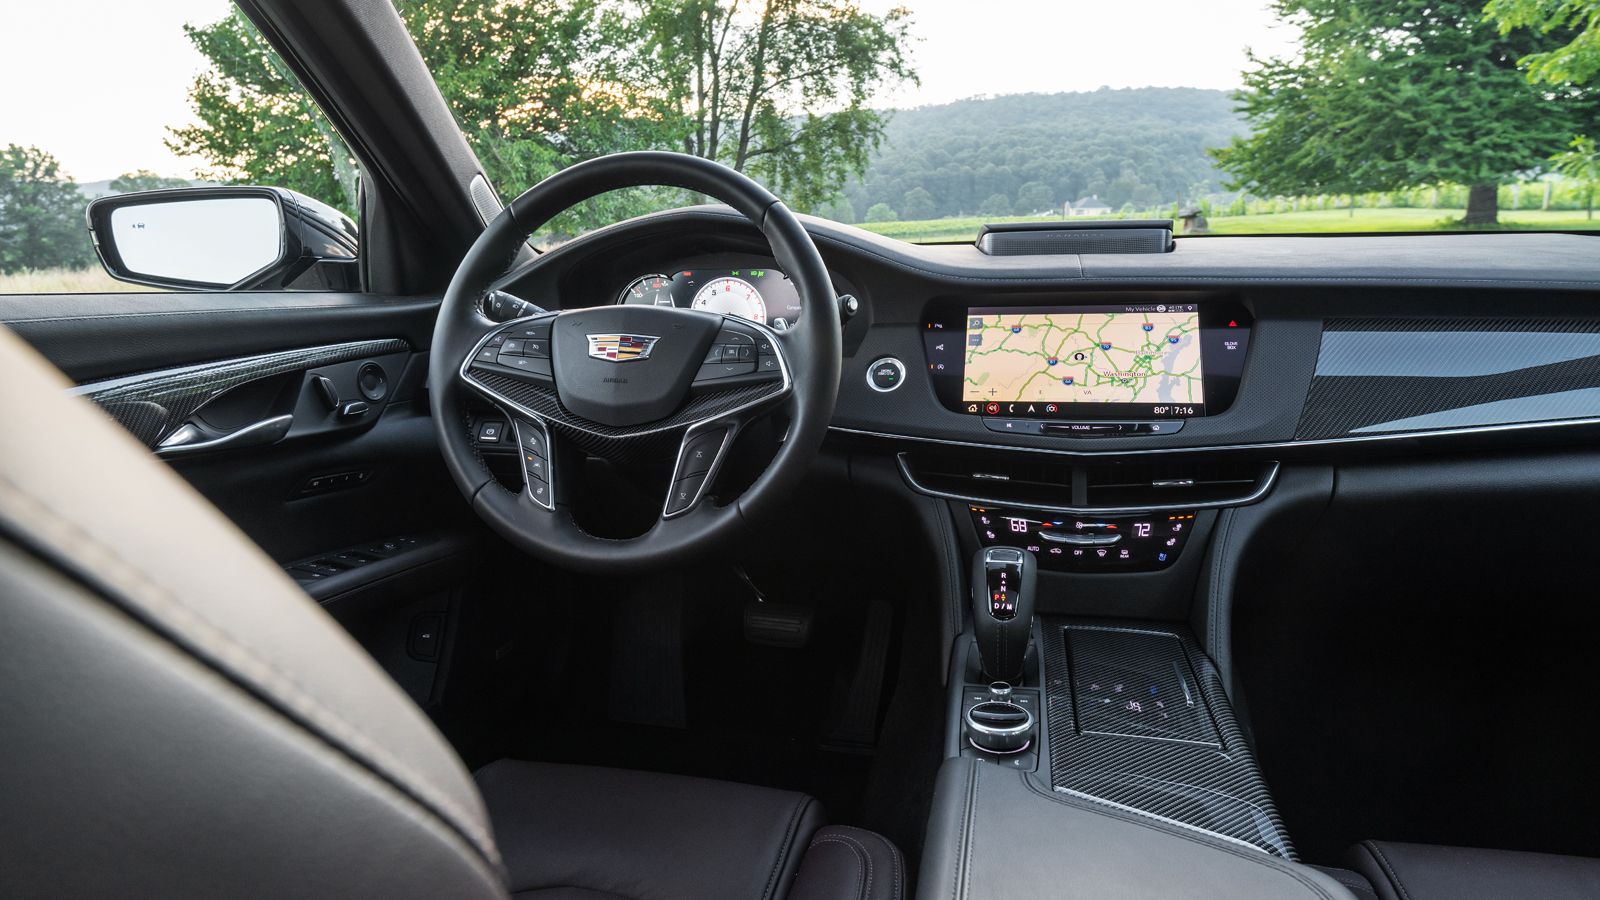 2020 Cadillac CT6-V road test: Everything you need to know